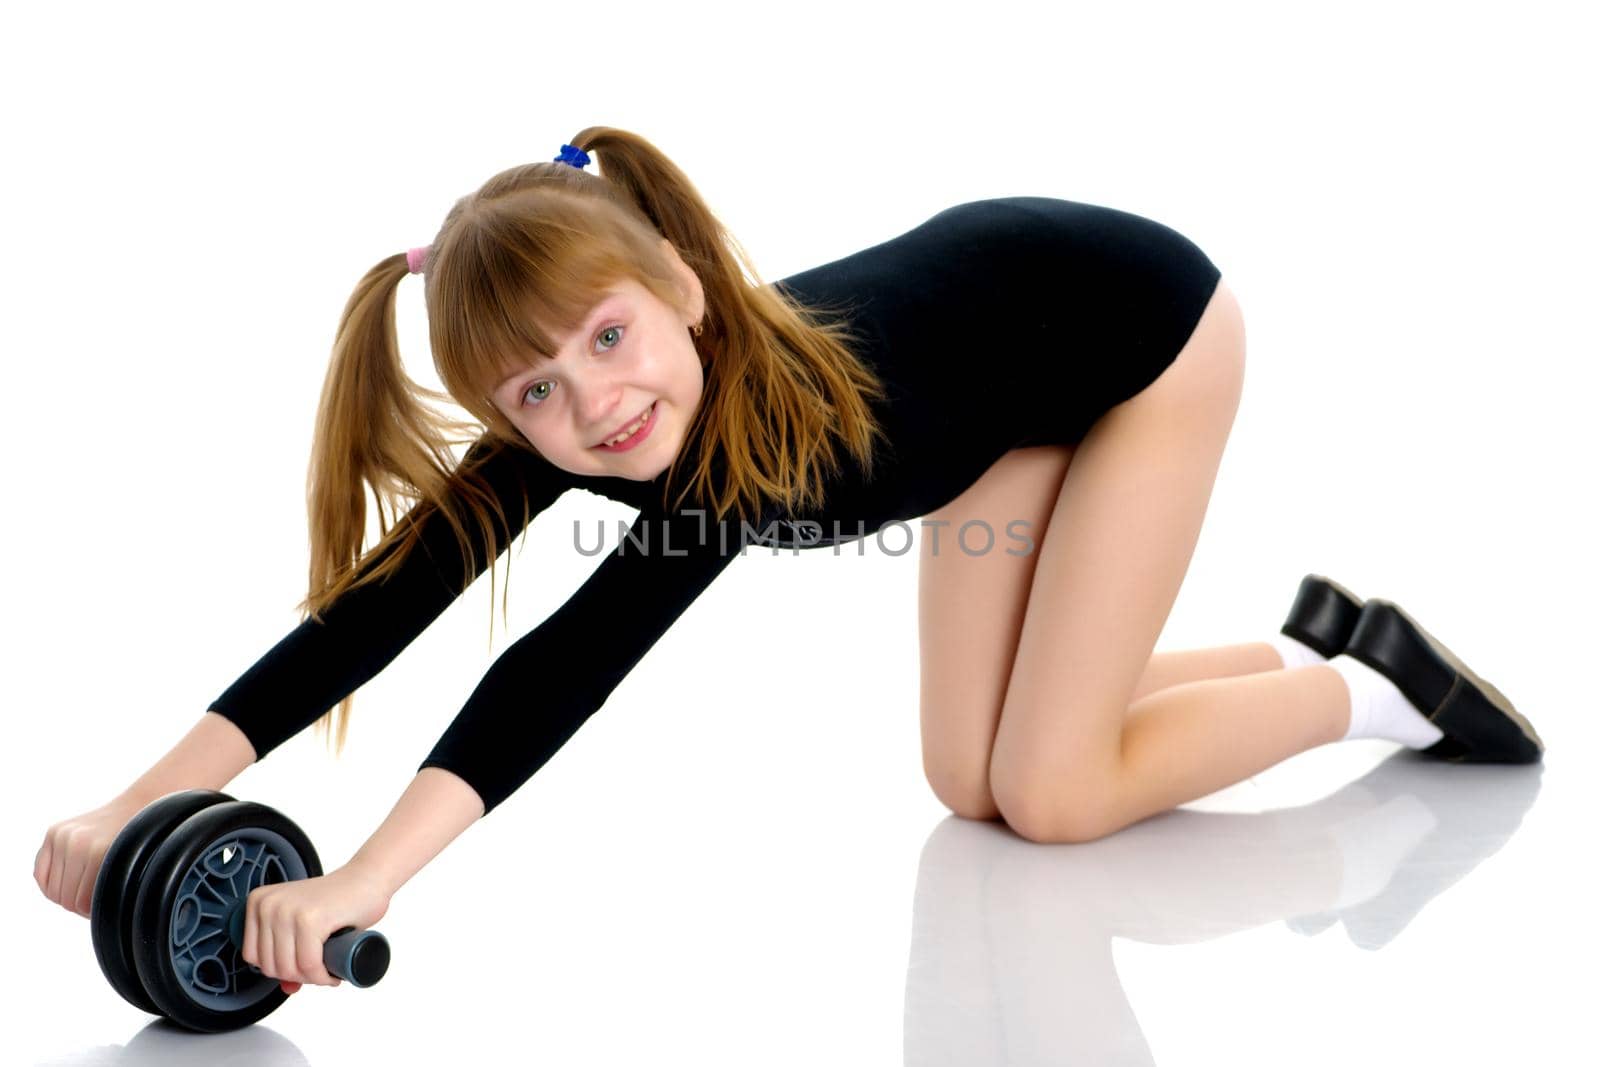 A nice little girl is performing gymnastic exercises. Concept of a healthy lifestyle, sport and fitness. Isolated on white background.